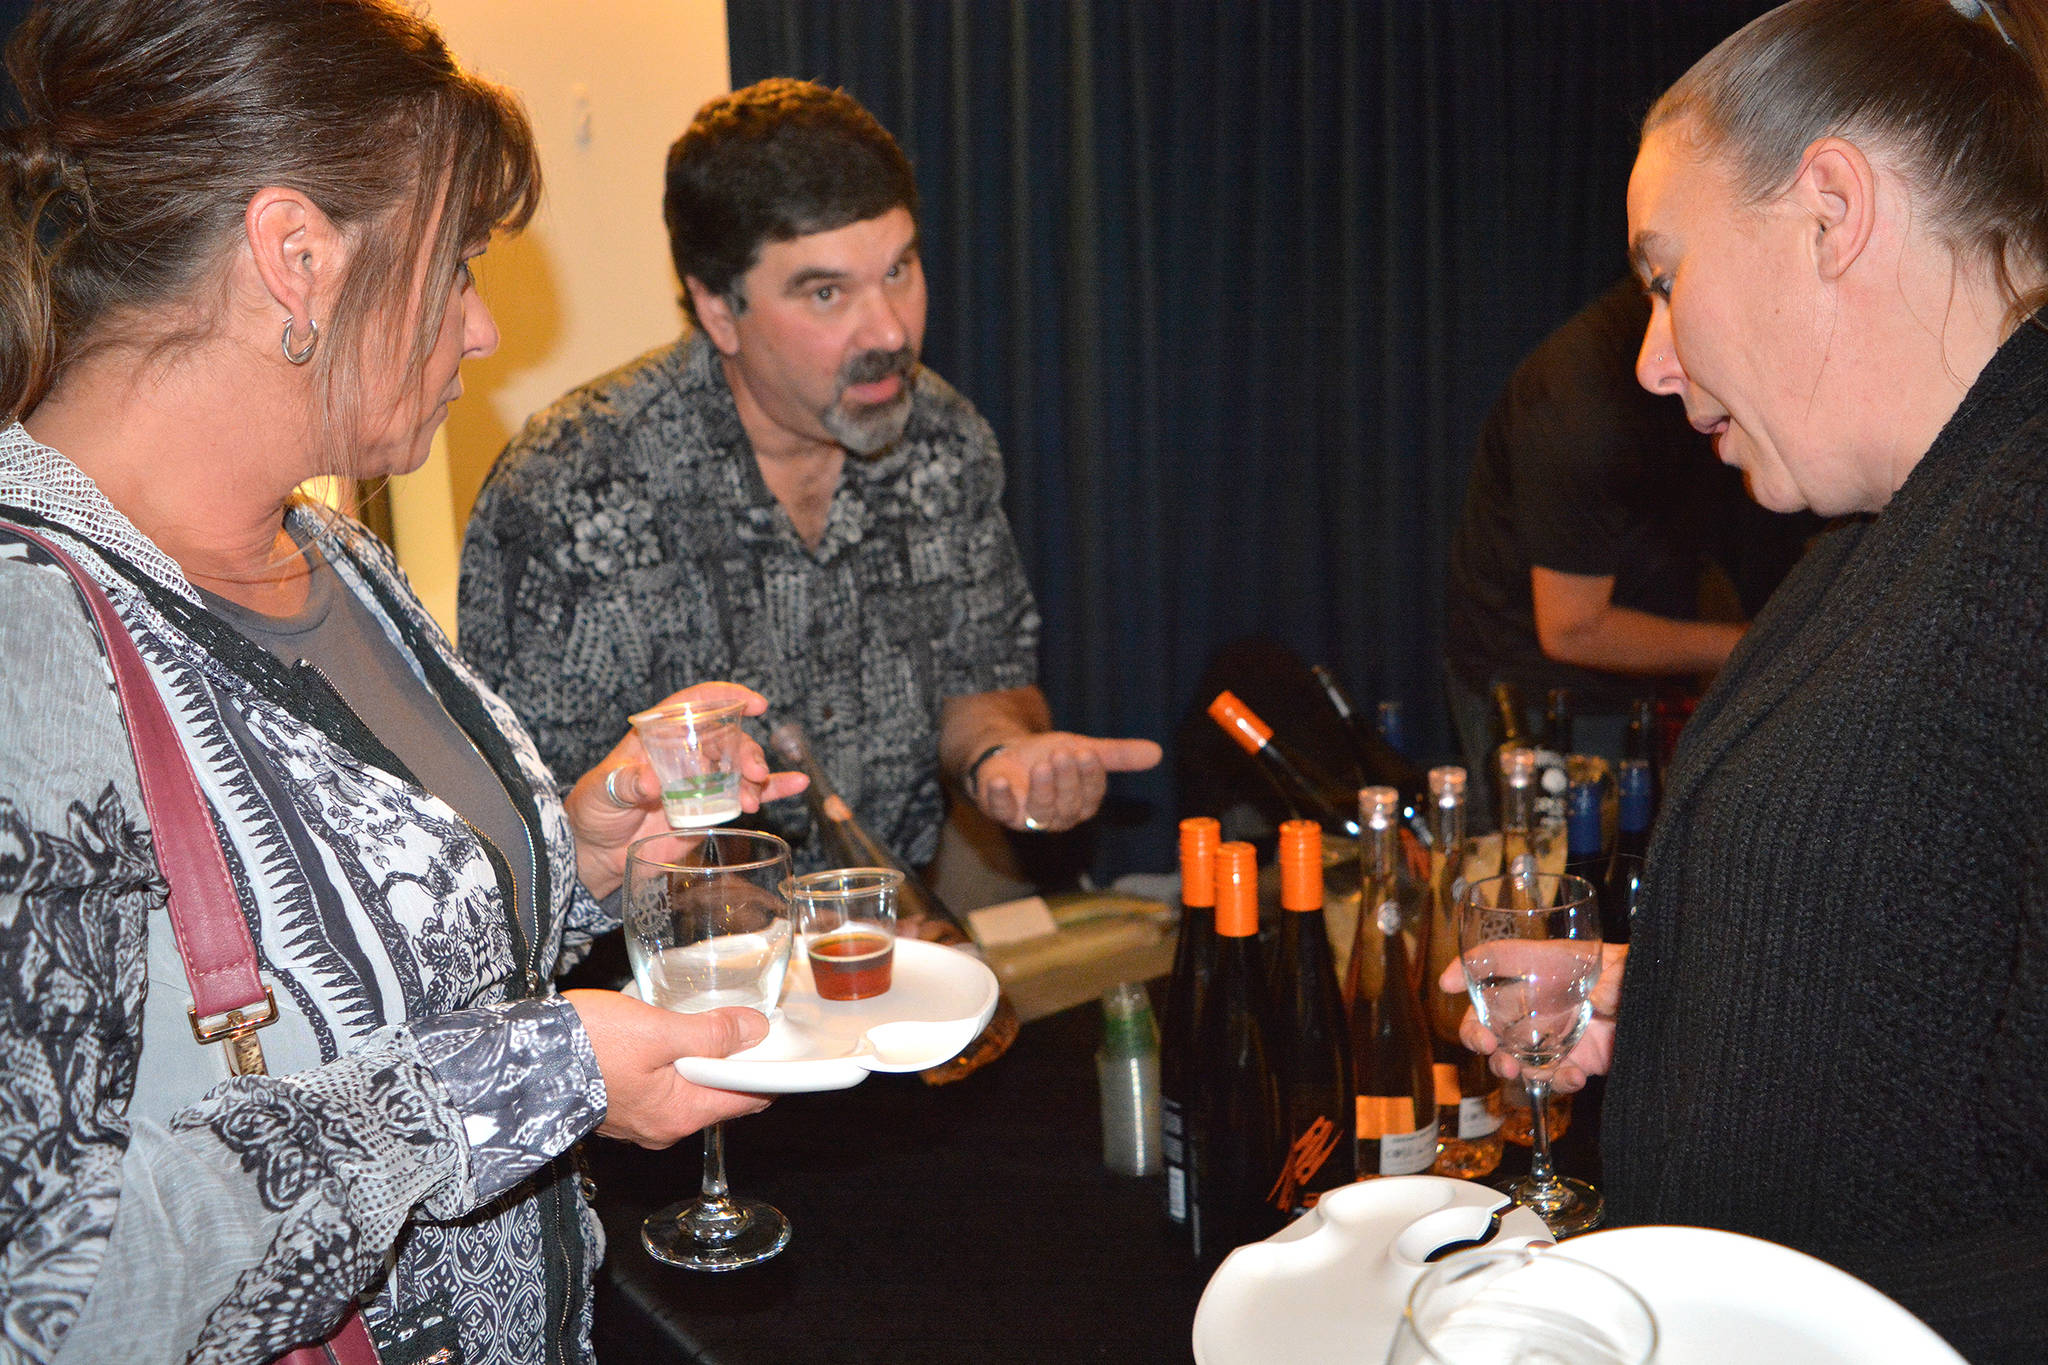 Rob Richmon of Stettler Co-op discusses various wines with Roxanne Dickie, left, and Brandi Page during Taste of Stettler Sept. 21. (Lisa Joy/Stettler Independent)